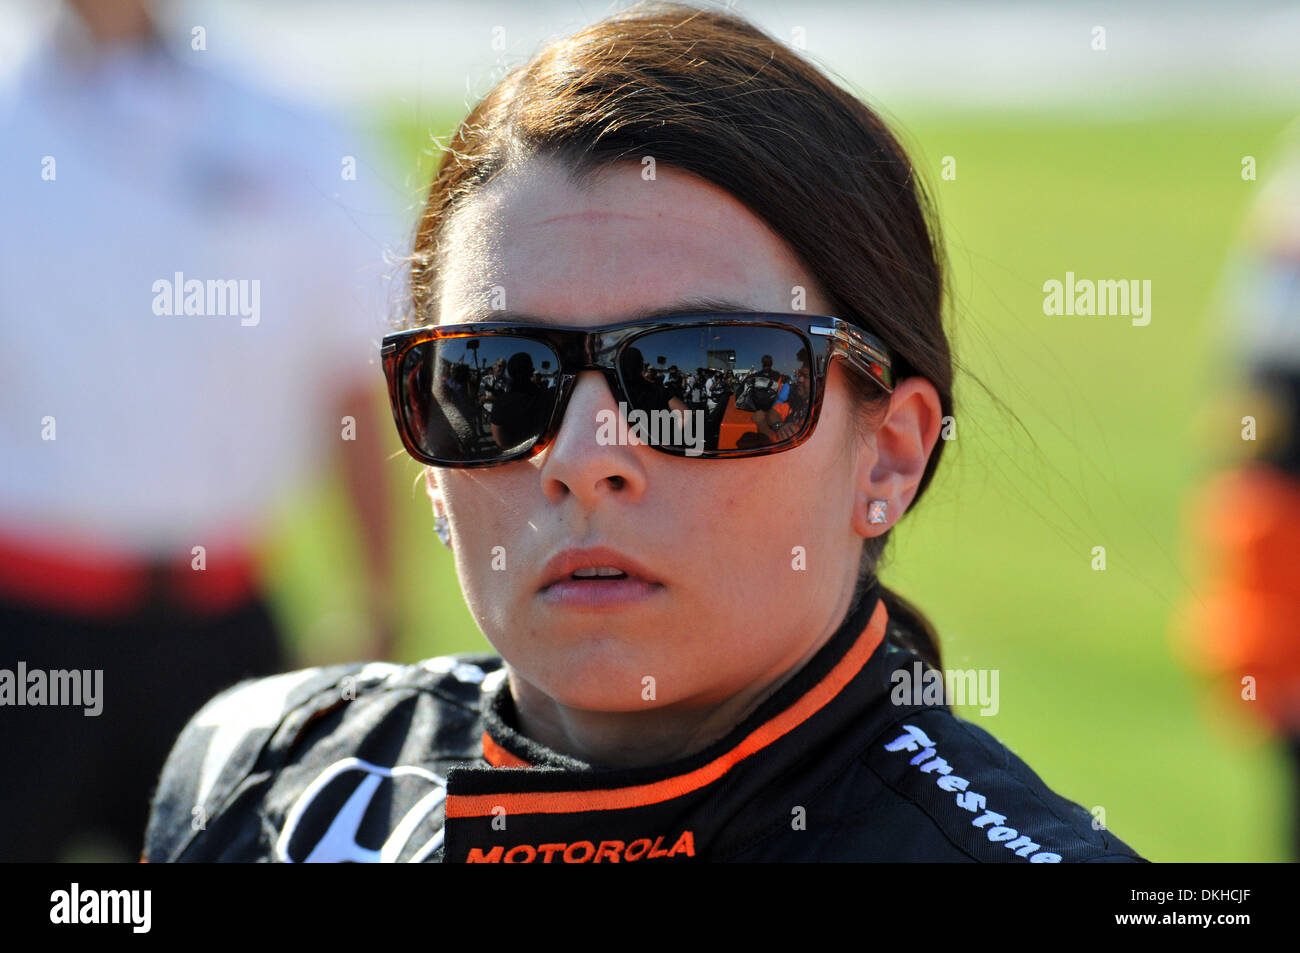 Andretti Green Racing driver Danica Patrick after the qualifying round at the Bombardier Learjet 550k at the Texas Motor Speedway in Fort Worth, Texas. (Credit Image: © Albert Pena/Southcreek Global/ZUMApress.com) Stock Photo